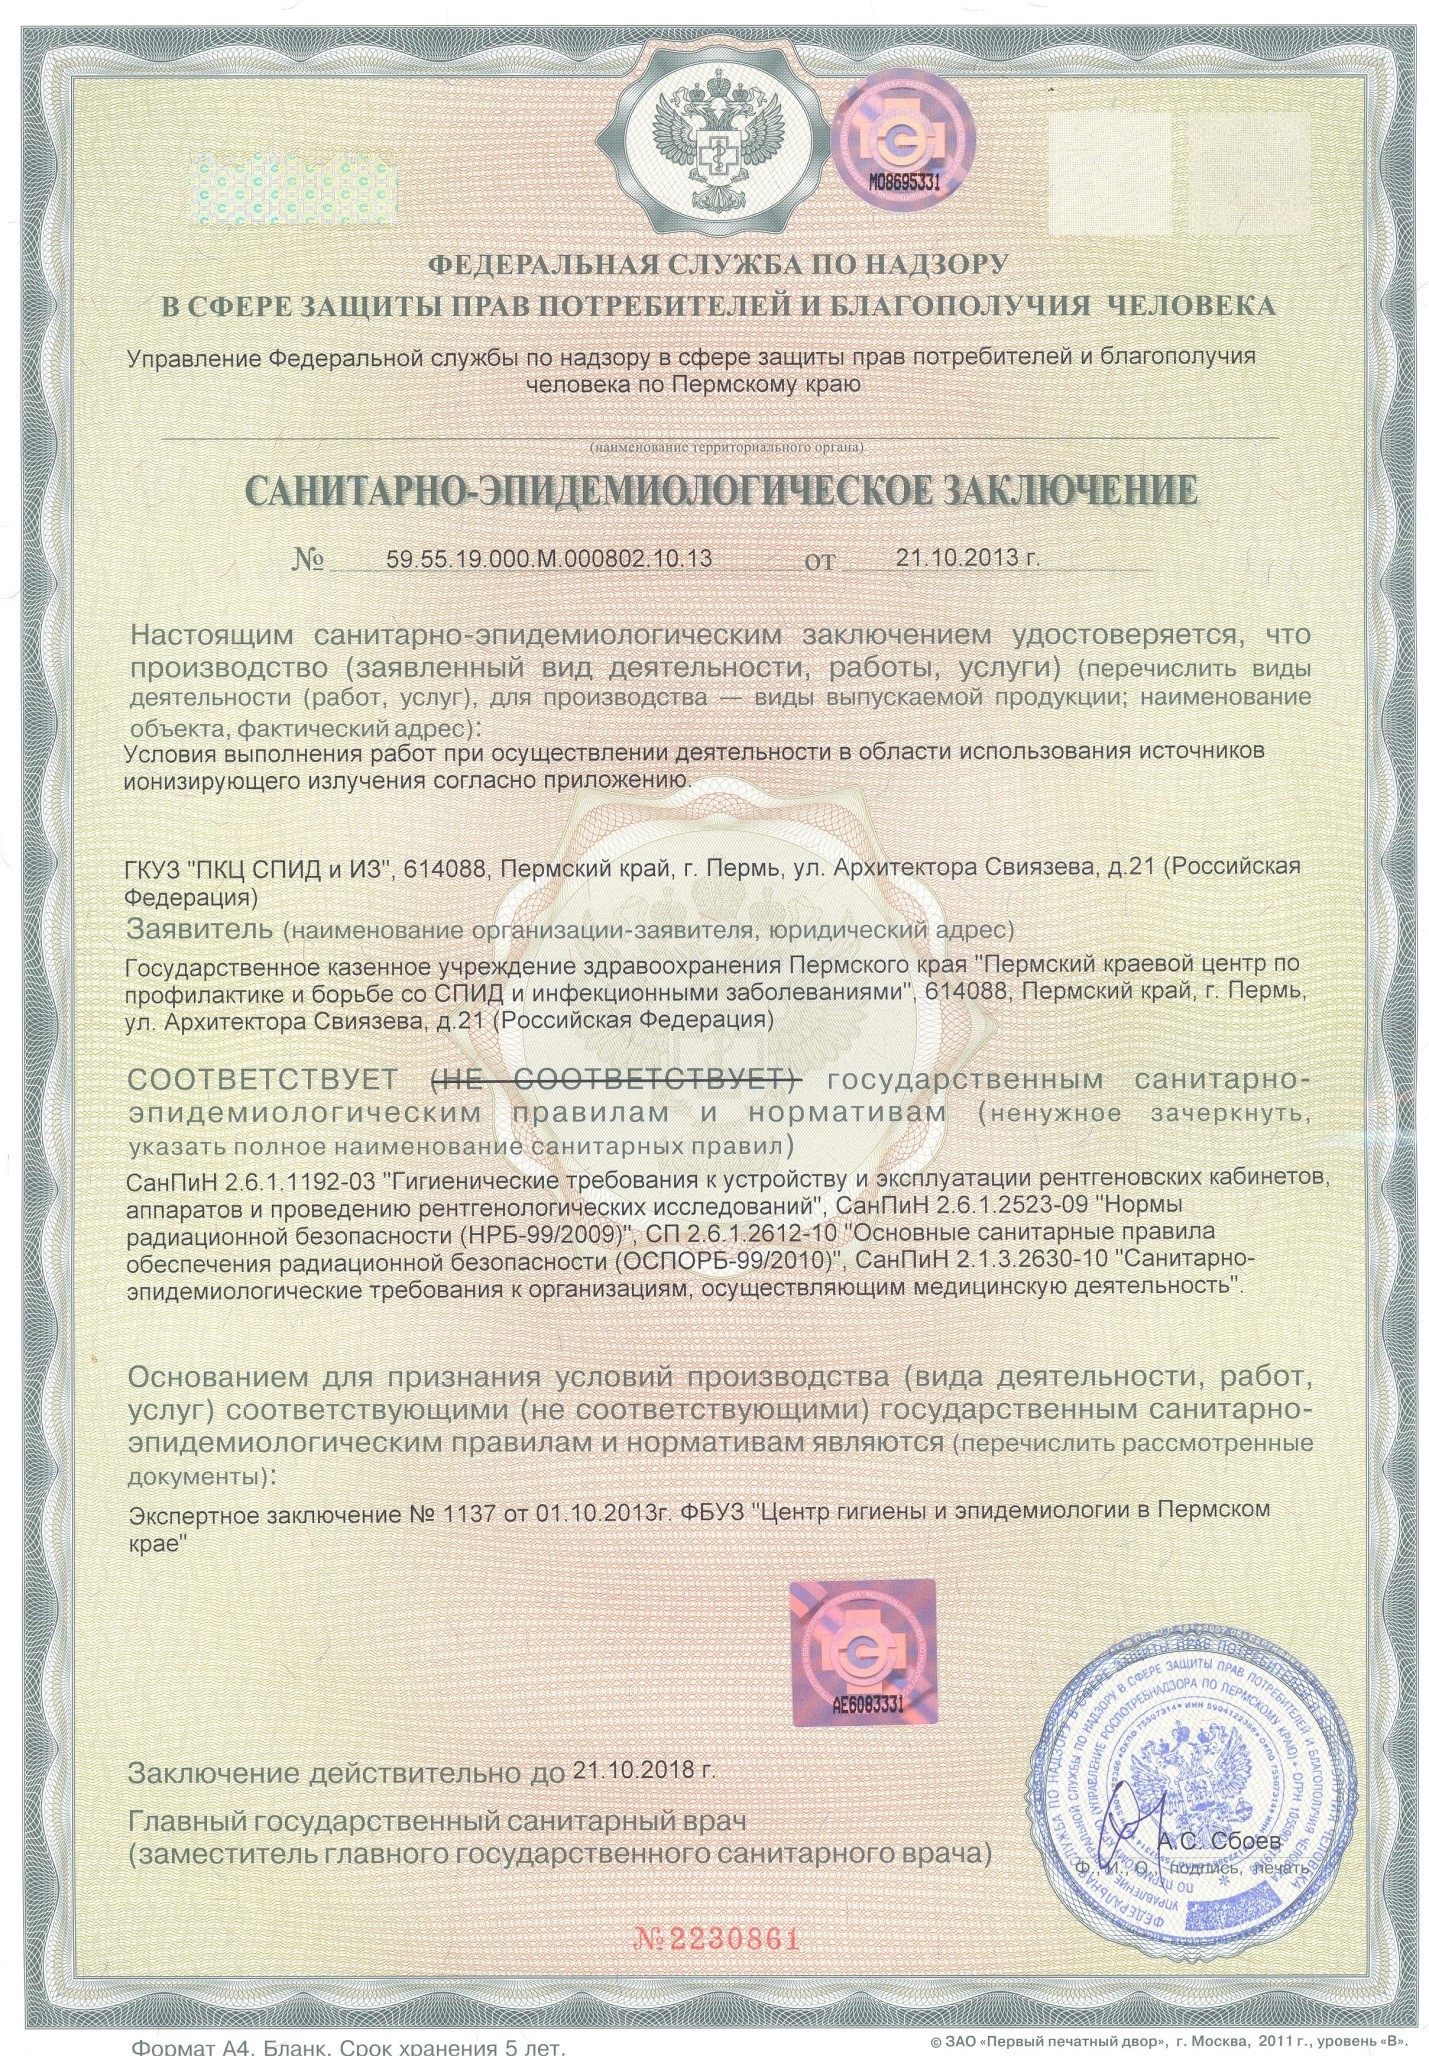 Sanitary-epidemiological certificate6